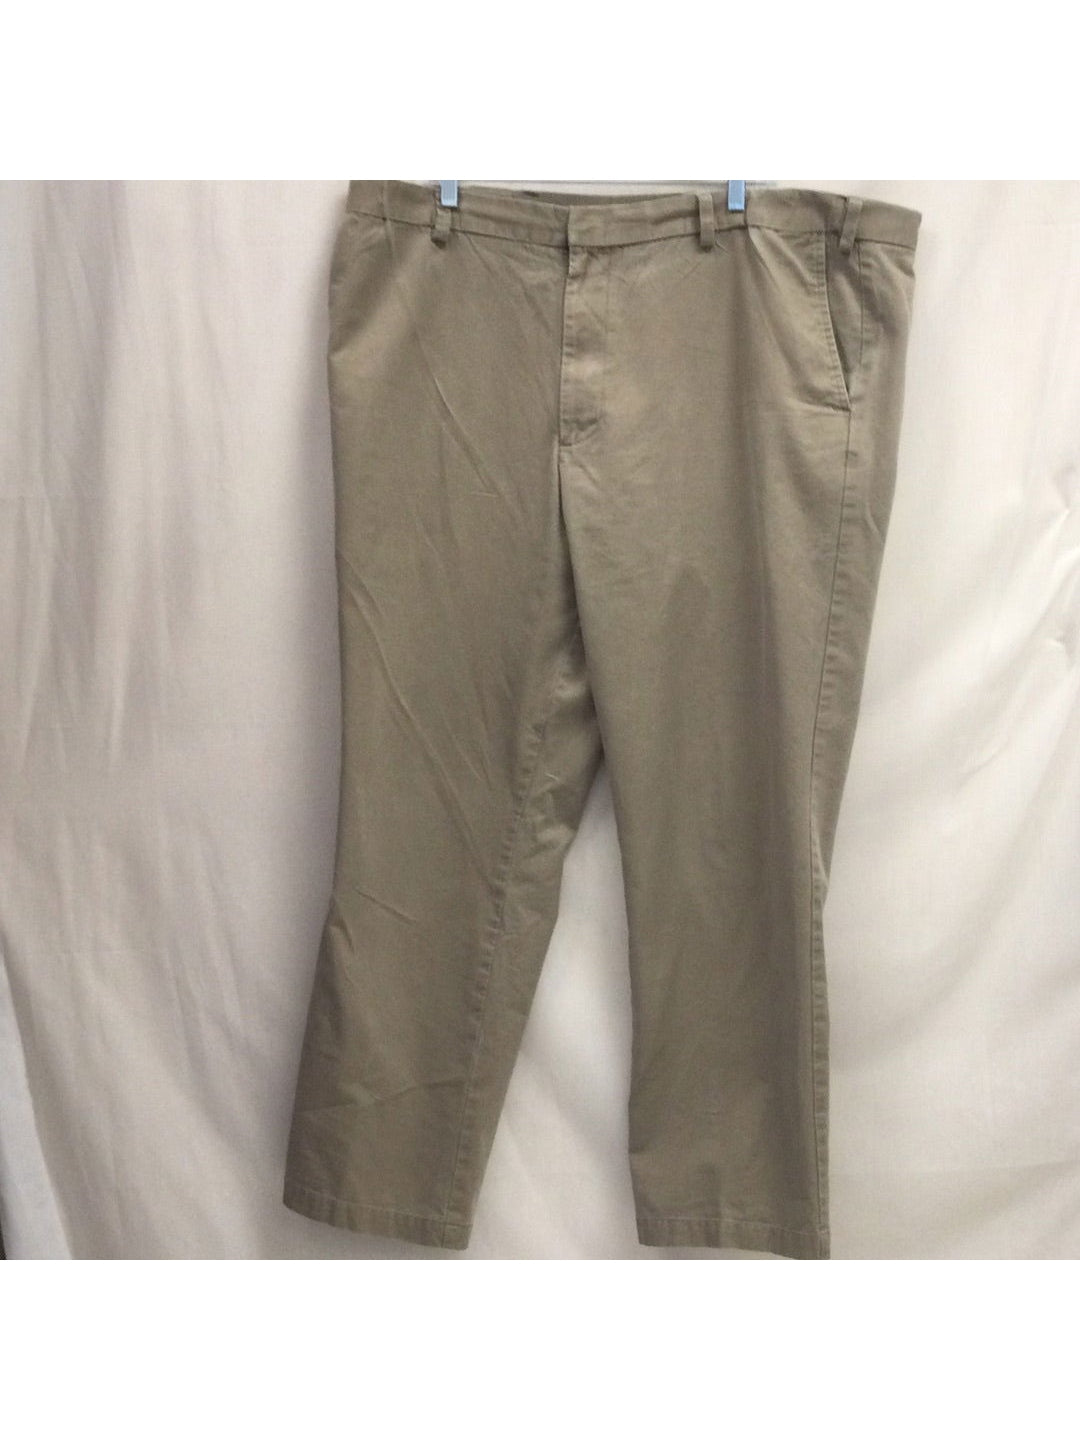 Dockers Mens Pants  Large Tan - The Kennedy Collective Thrift - 